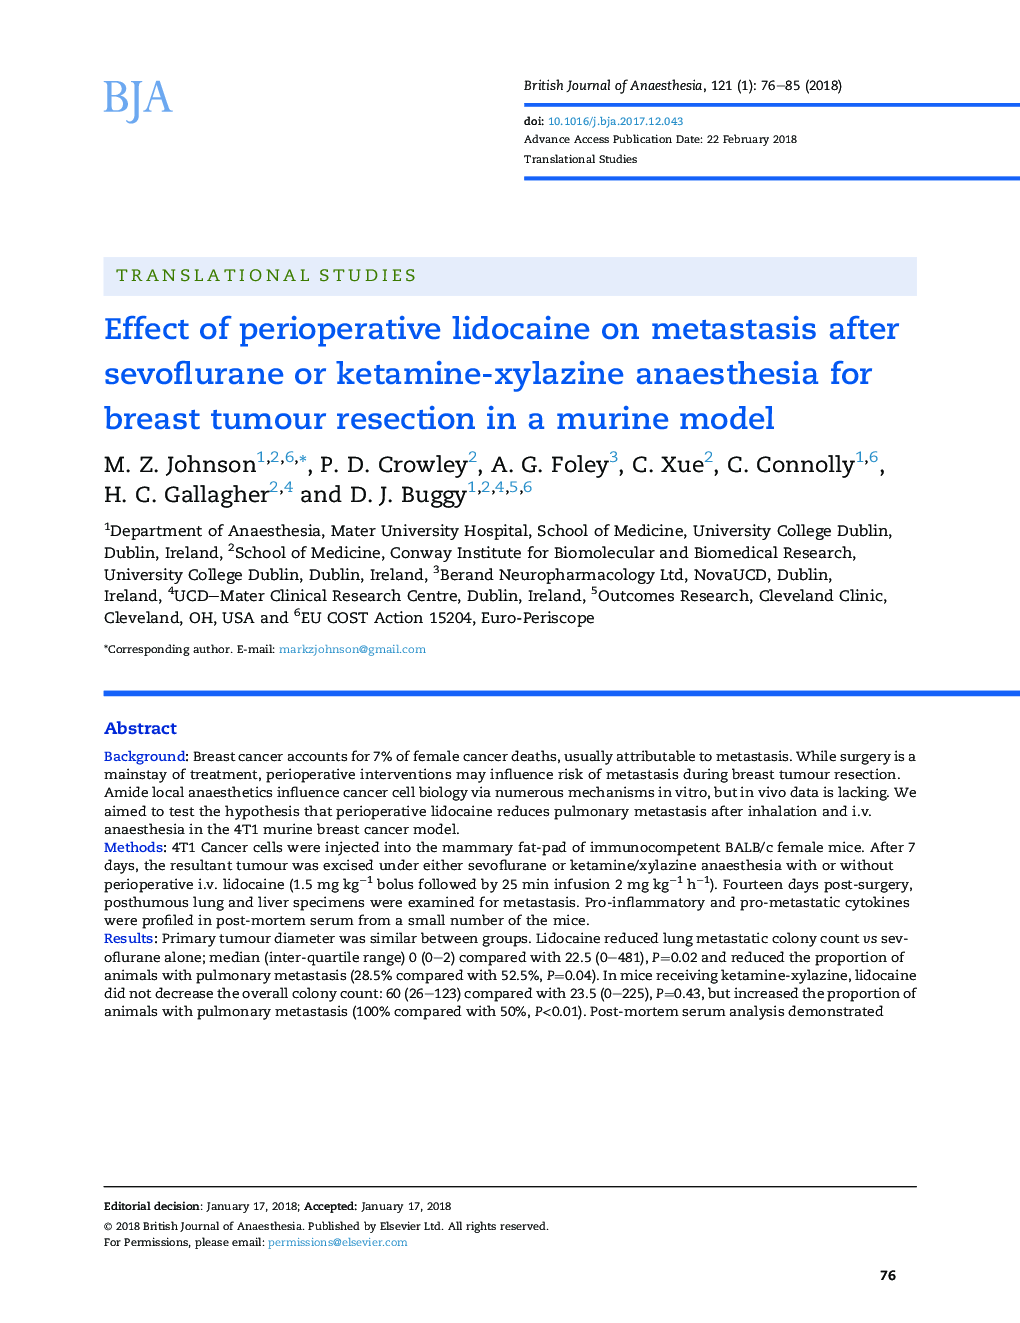 Effect of perioperative lidocaine on metastasis after sevoflurane or ketamine-xylazine anaesthesia for breast tumour resection in a murine model